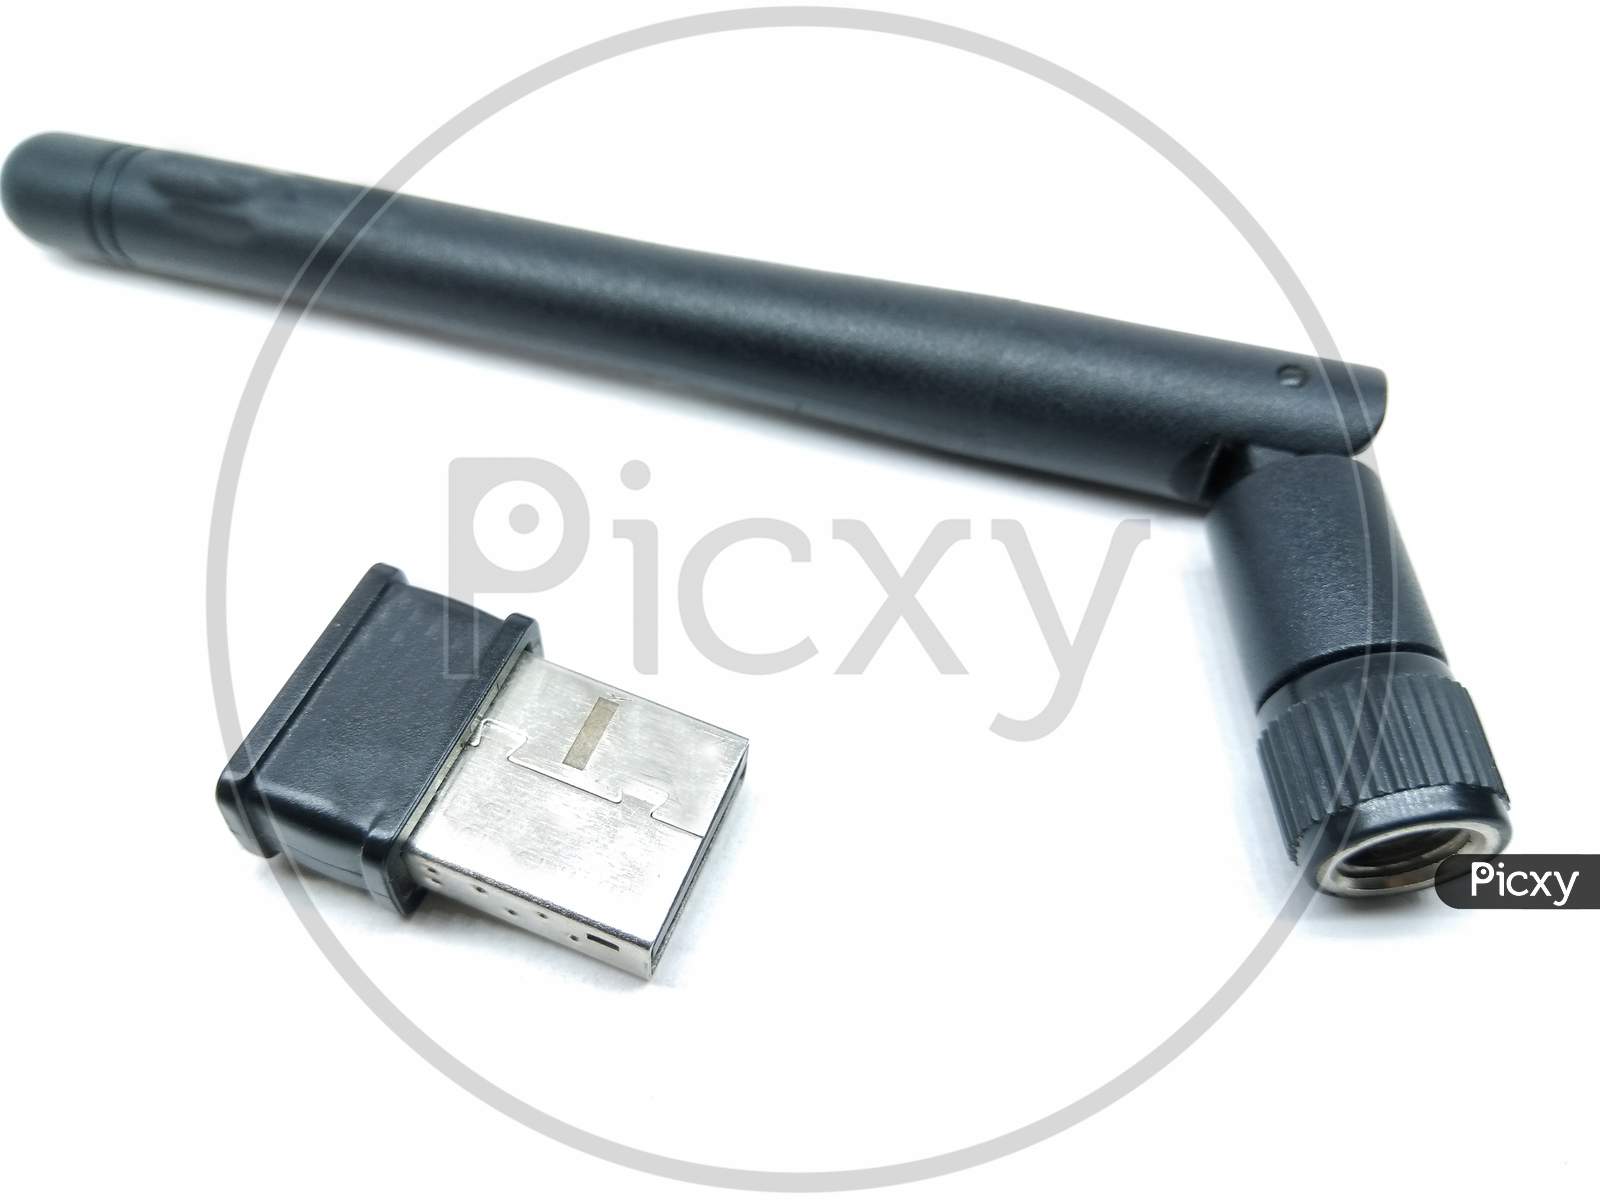 A picture of WiFi dongle with white background